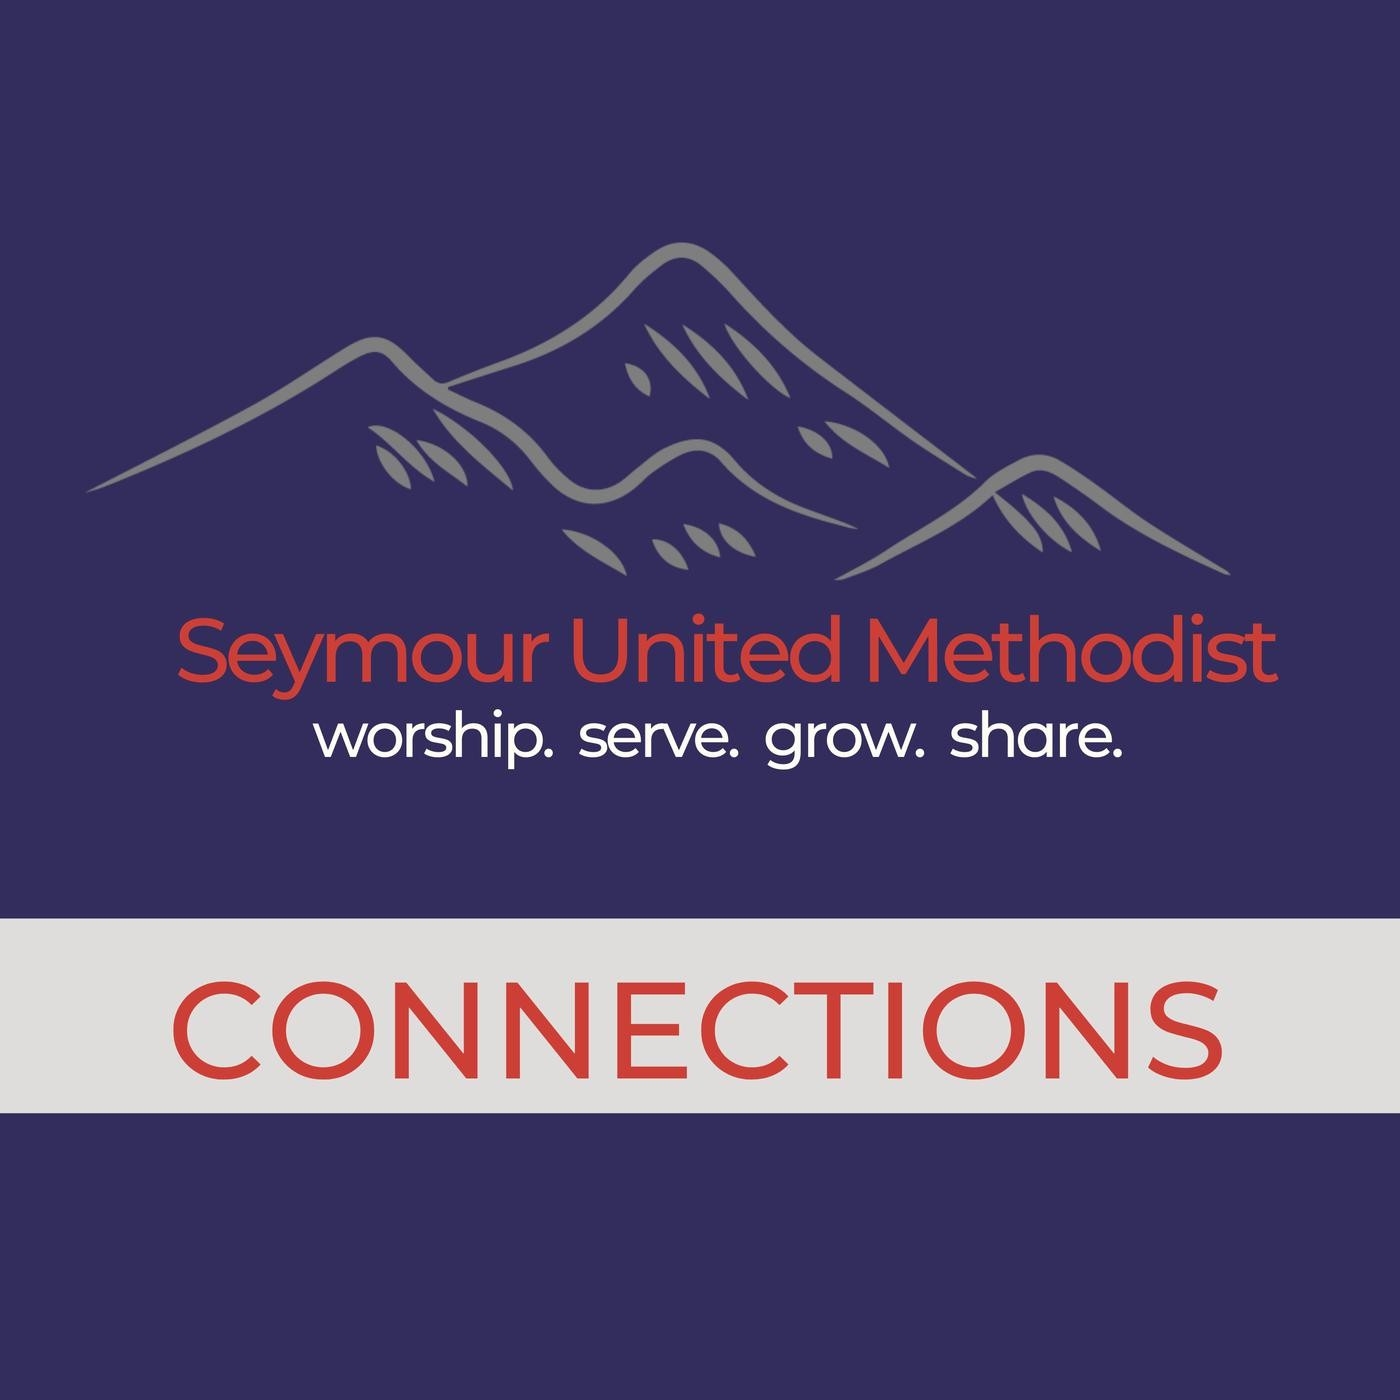 Connections With Seymour United Methodist Church (Podcast  Lectendary For The Methdosit Church